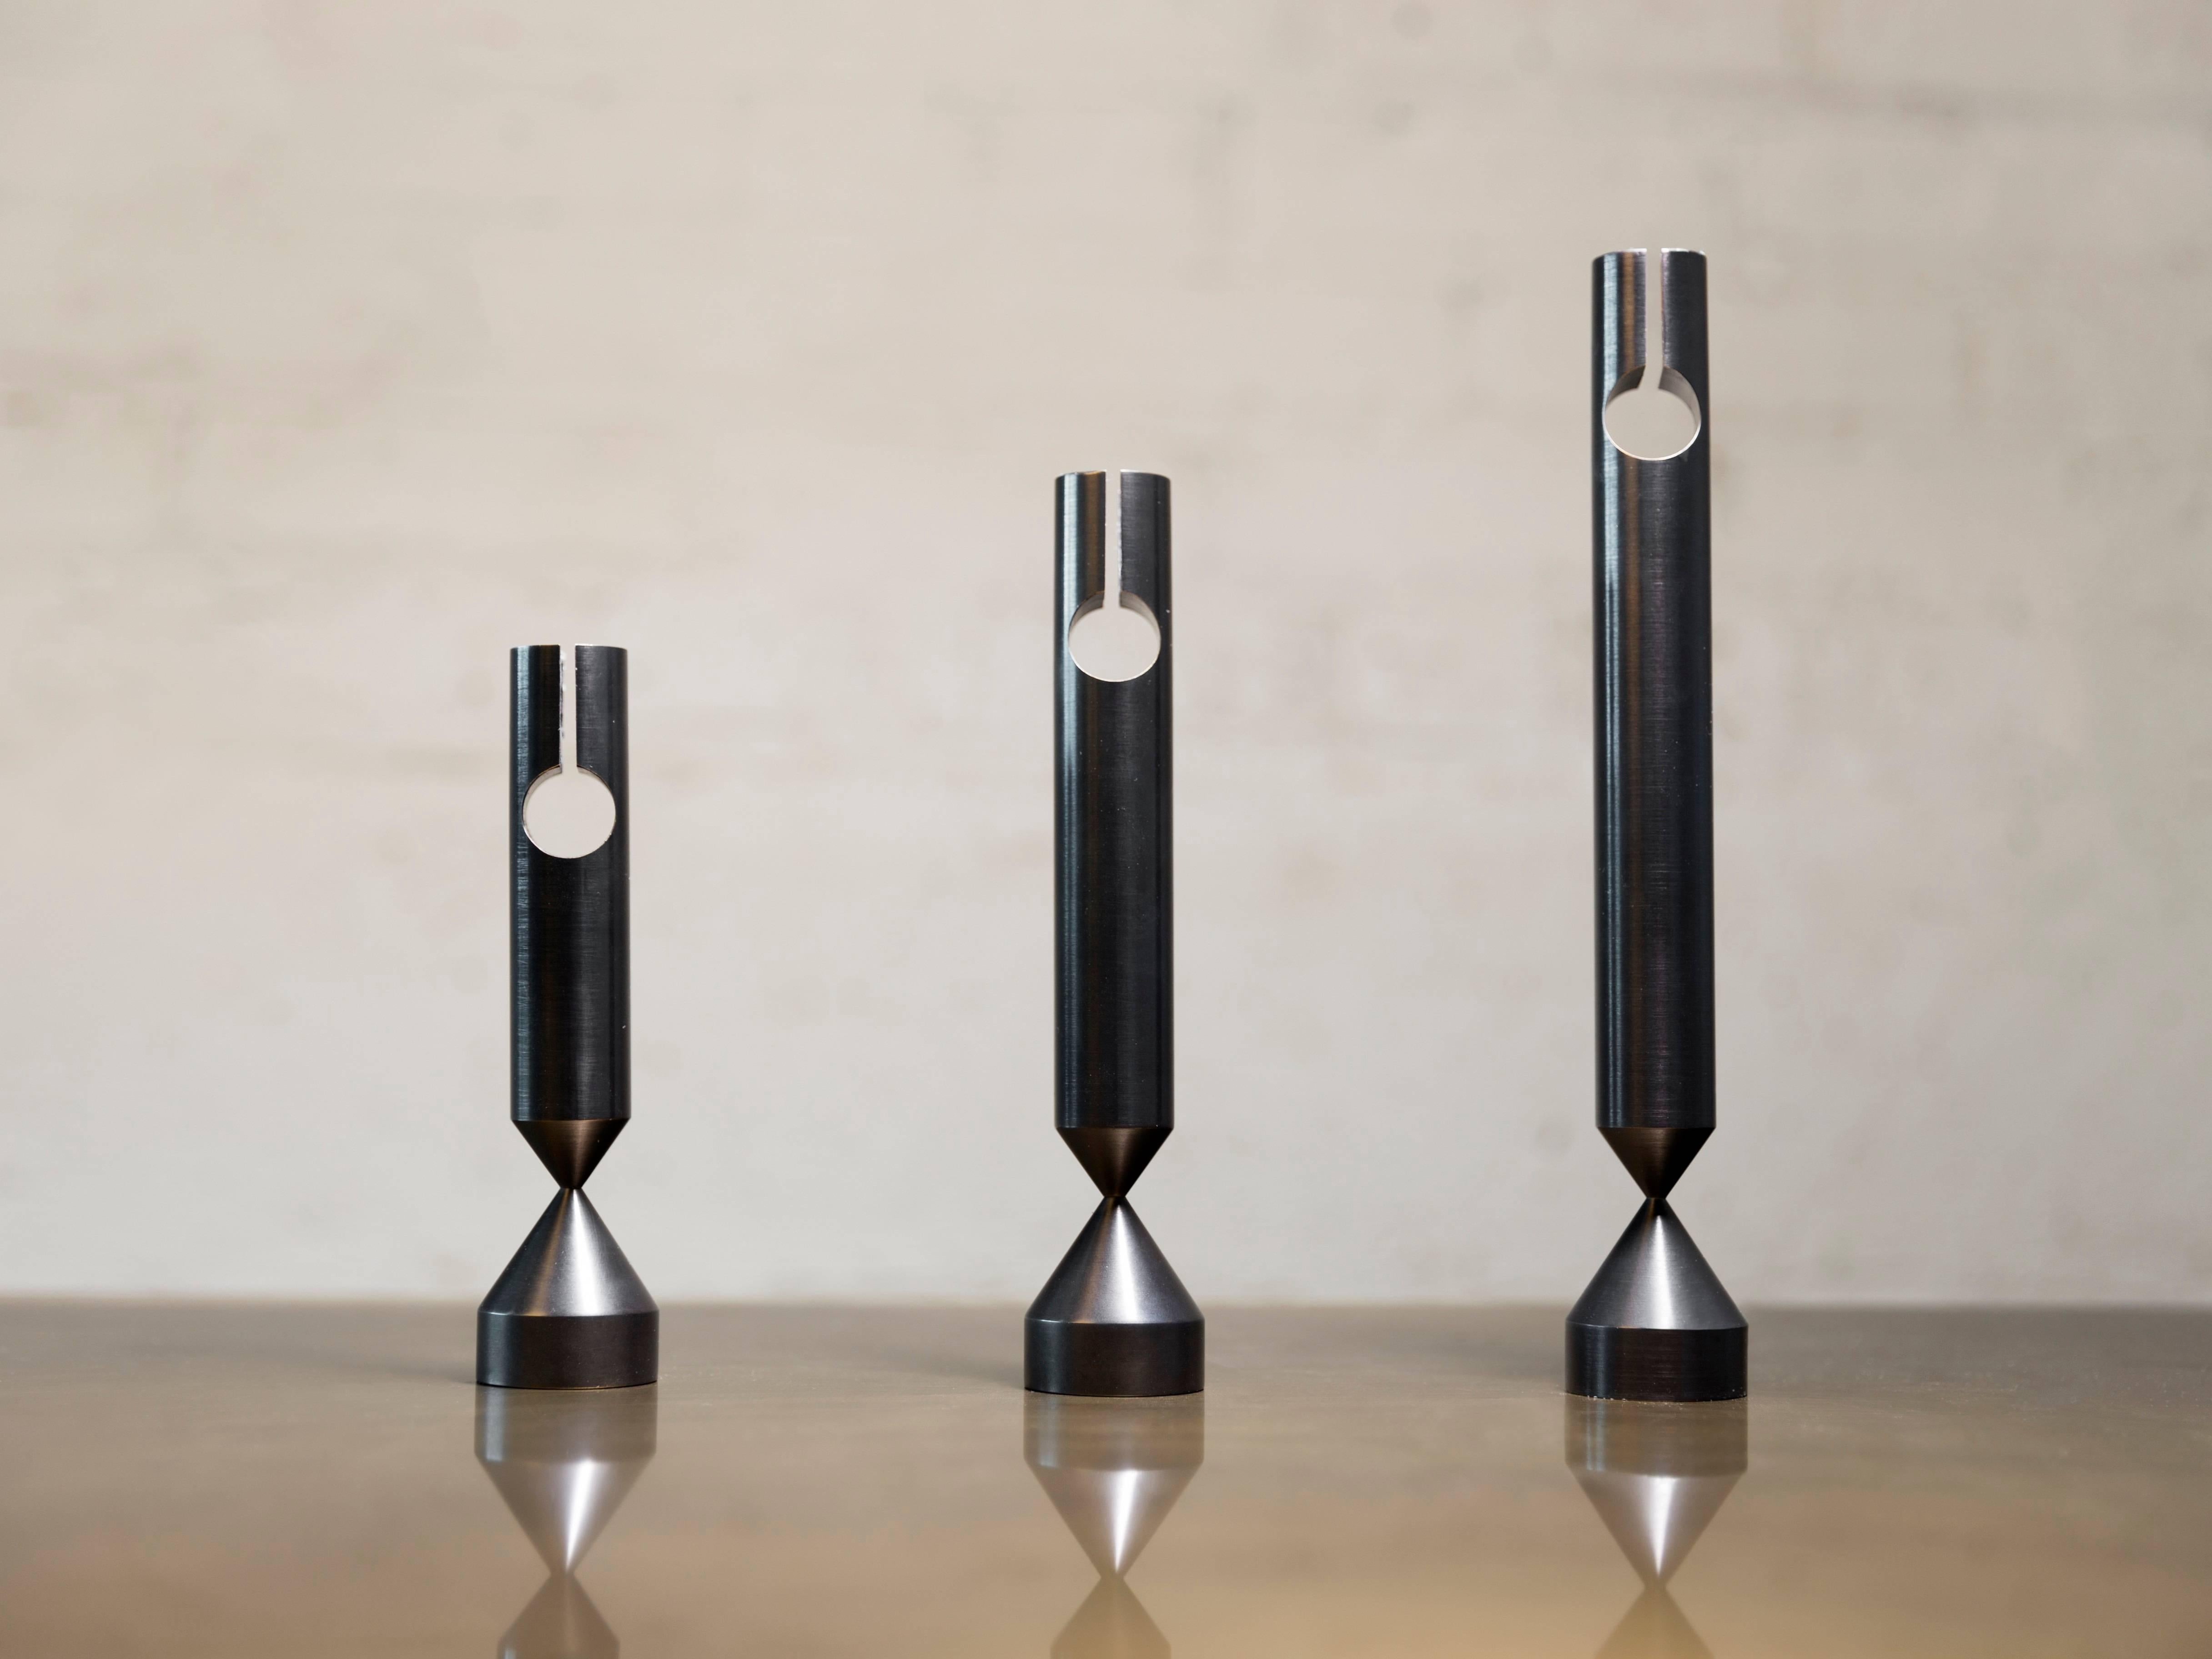 American Pillar Candlesticks with Three Sizes, Handcrafted in Chicago For Sale